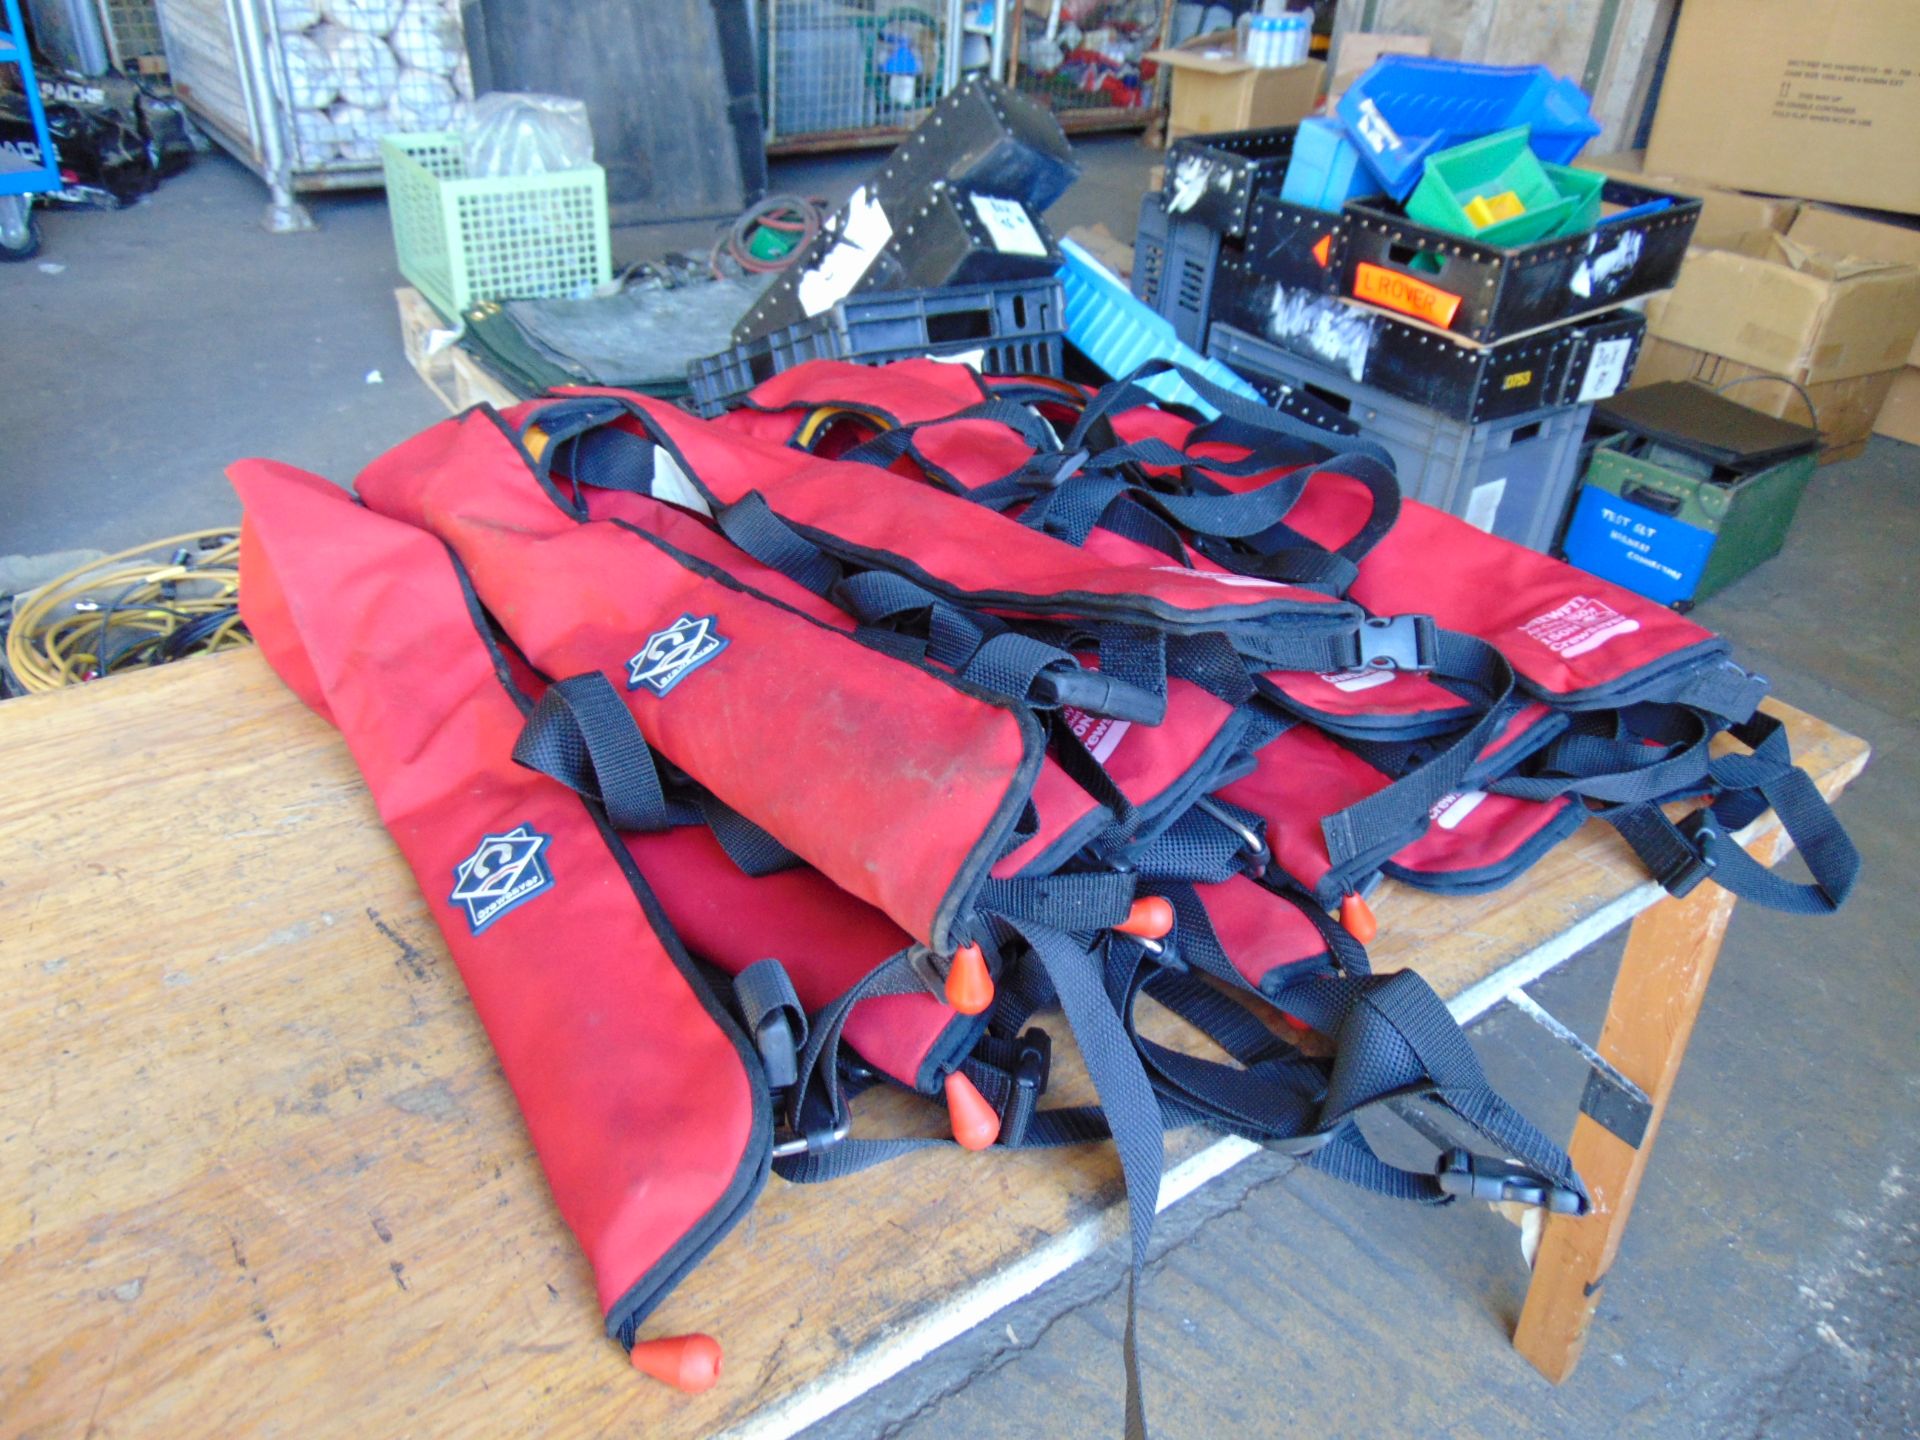 6 x Crew Saver 150 N Life Jackets from UK Fire / Rescue Services - Image 2 of 6